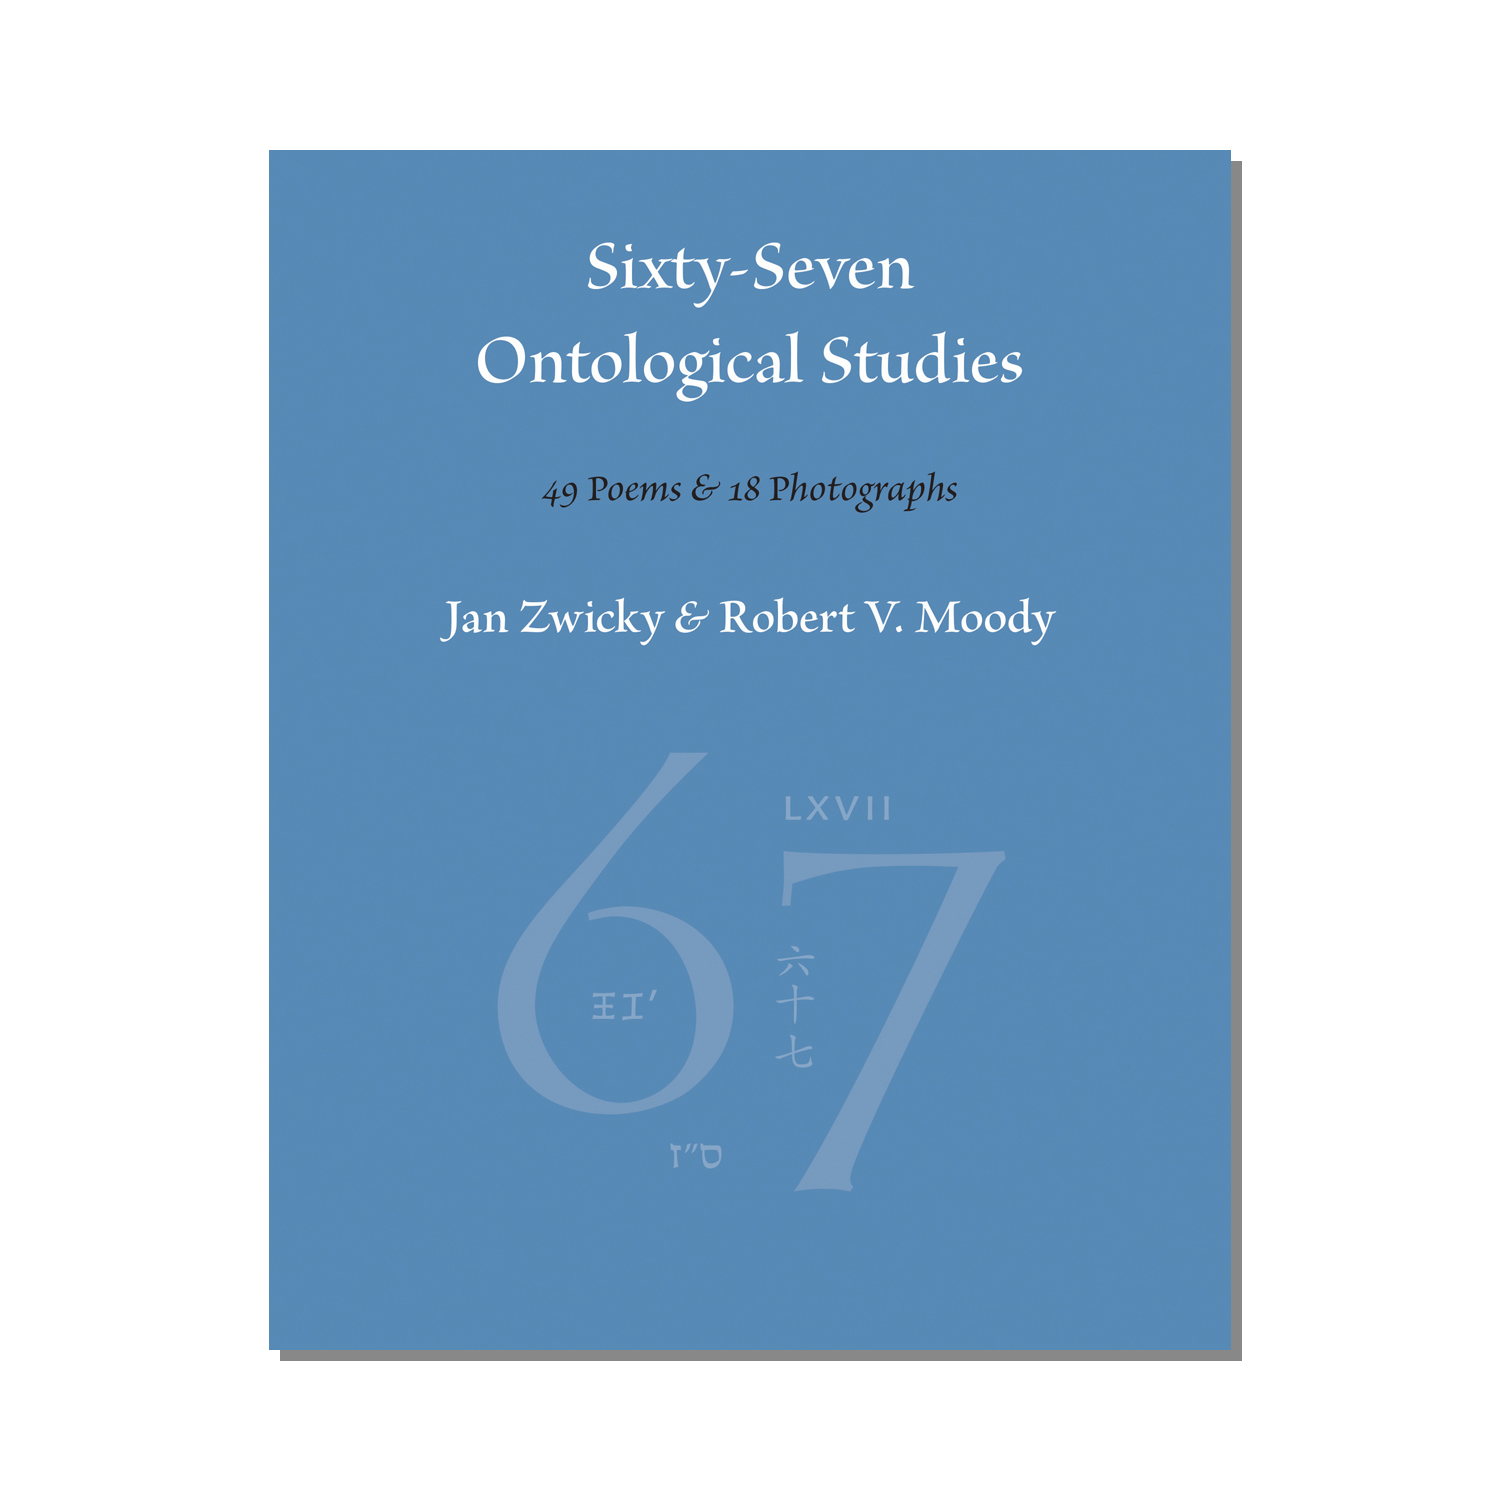 Book cover for Sixty-Seven Ontological Studies by Jan Zwicky and Robert V. Moody